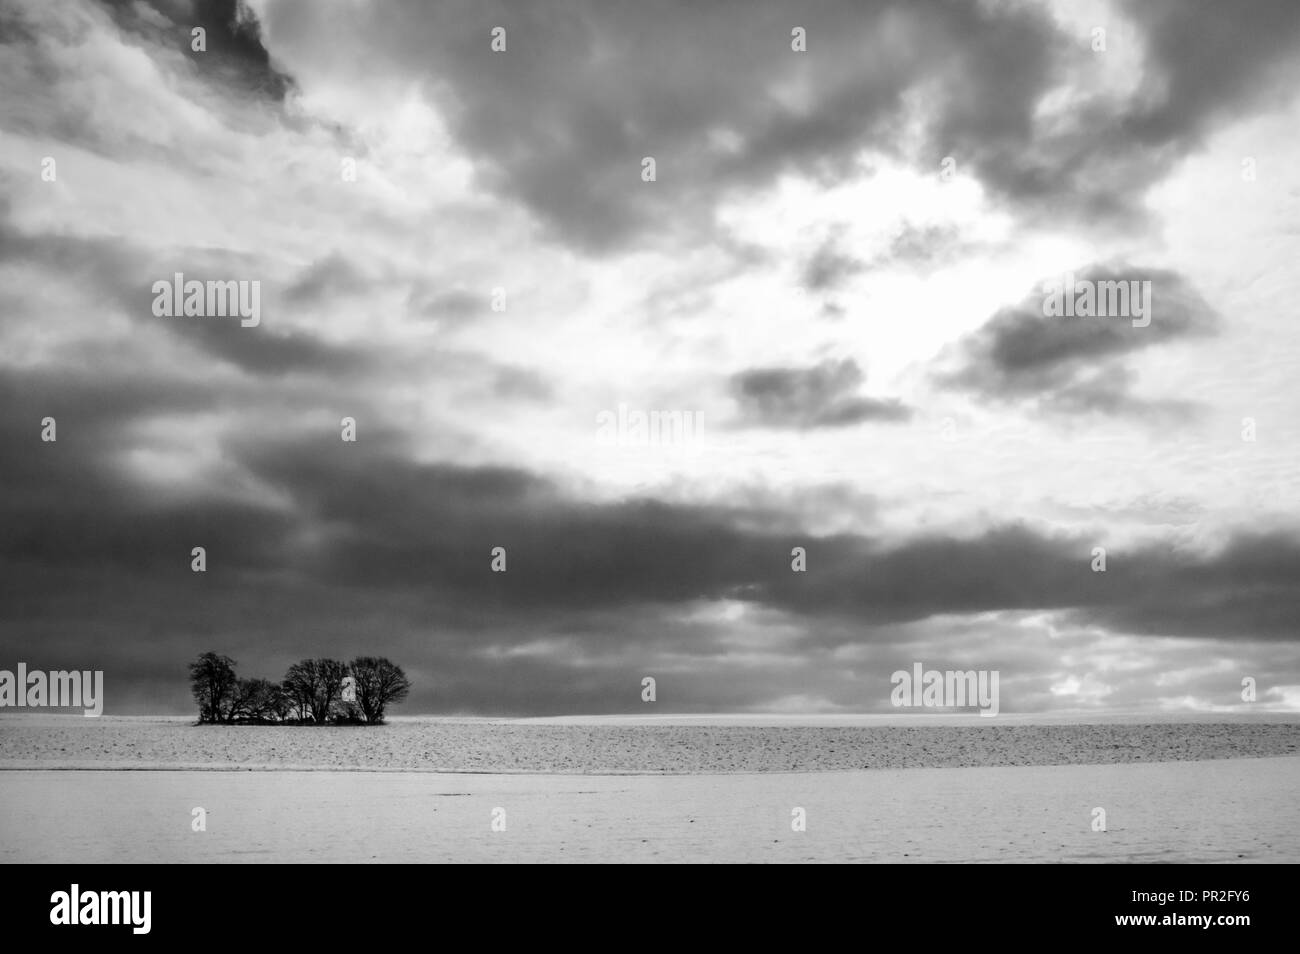 Black and white landscape, a minimalist winter image, with a few trees alone on a big snowy field, under a dramatic sky, near Ilshofen, Germany. Stock Photo